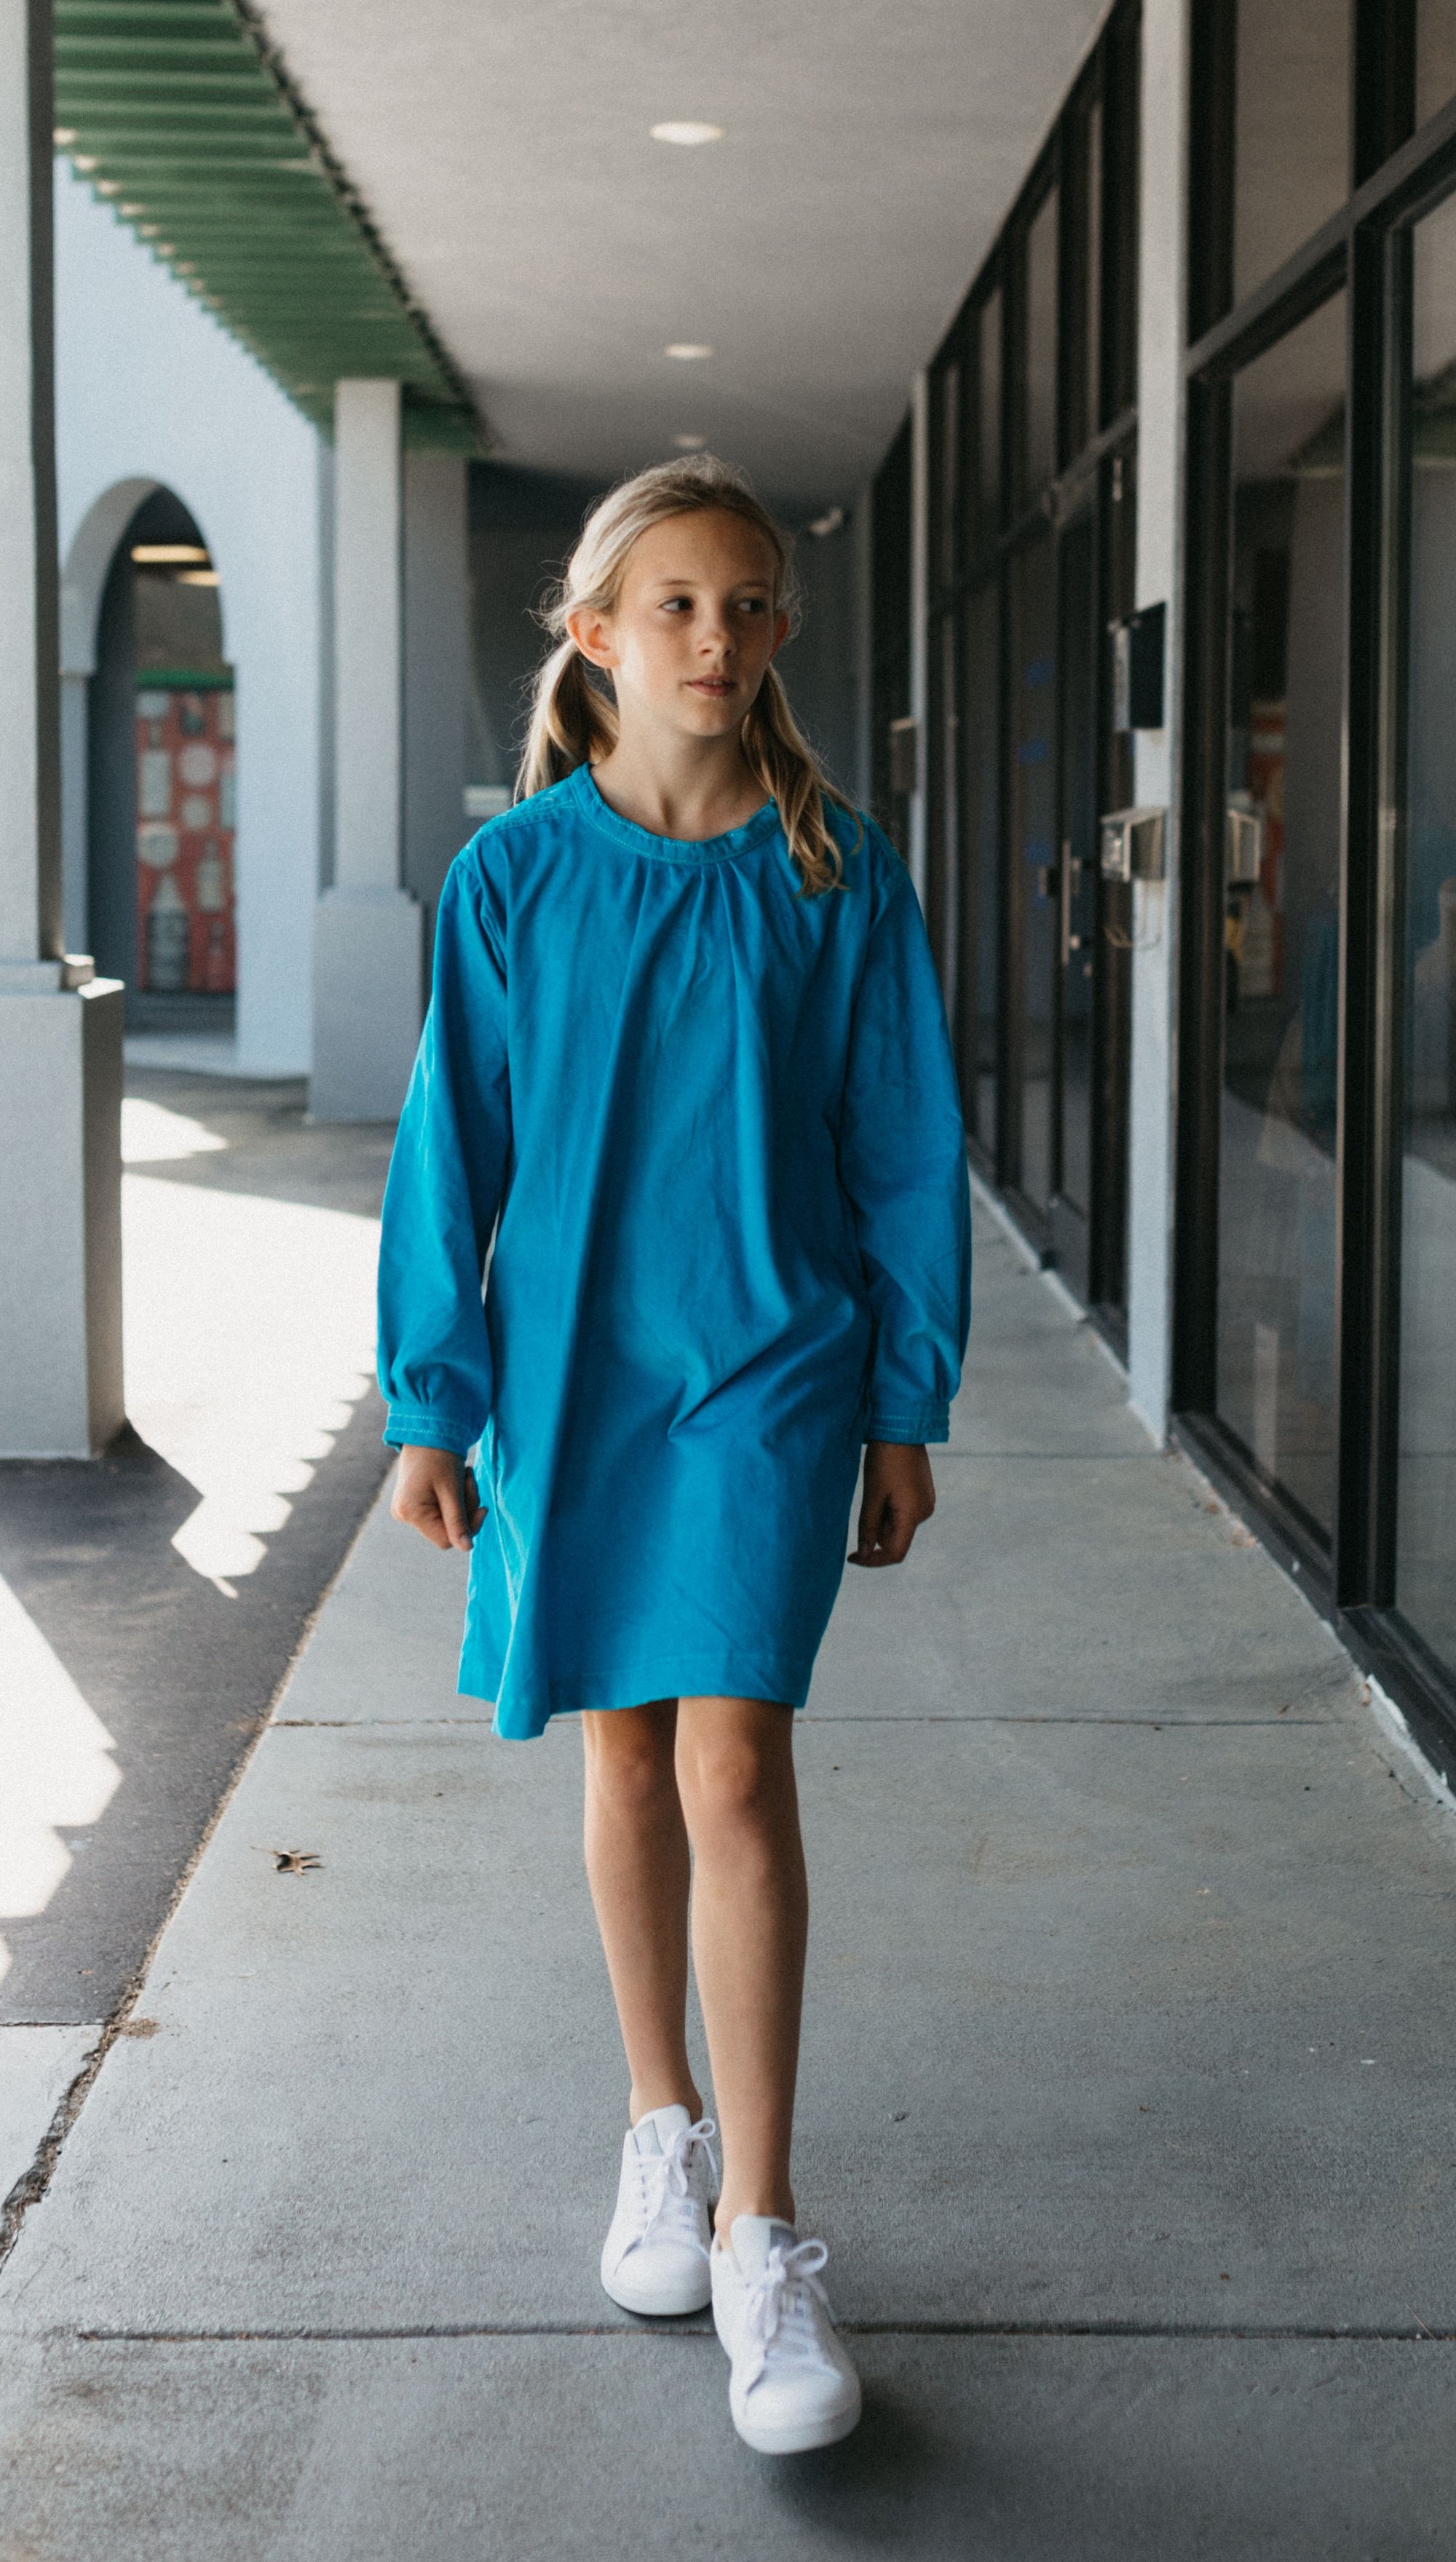 Photo of young girl wearing a blue corduroy Smock. Model is walking outside on sidewalk in front of stores. 